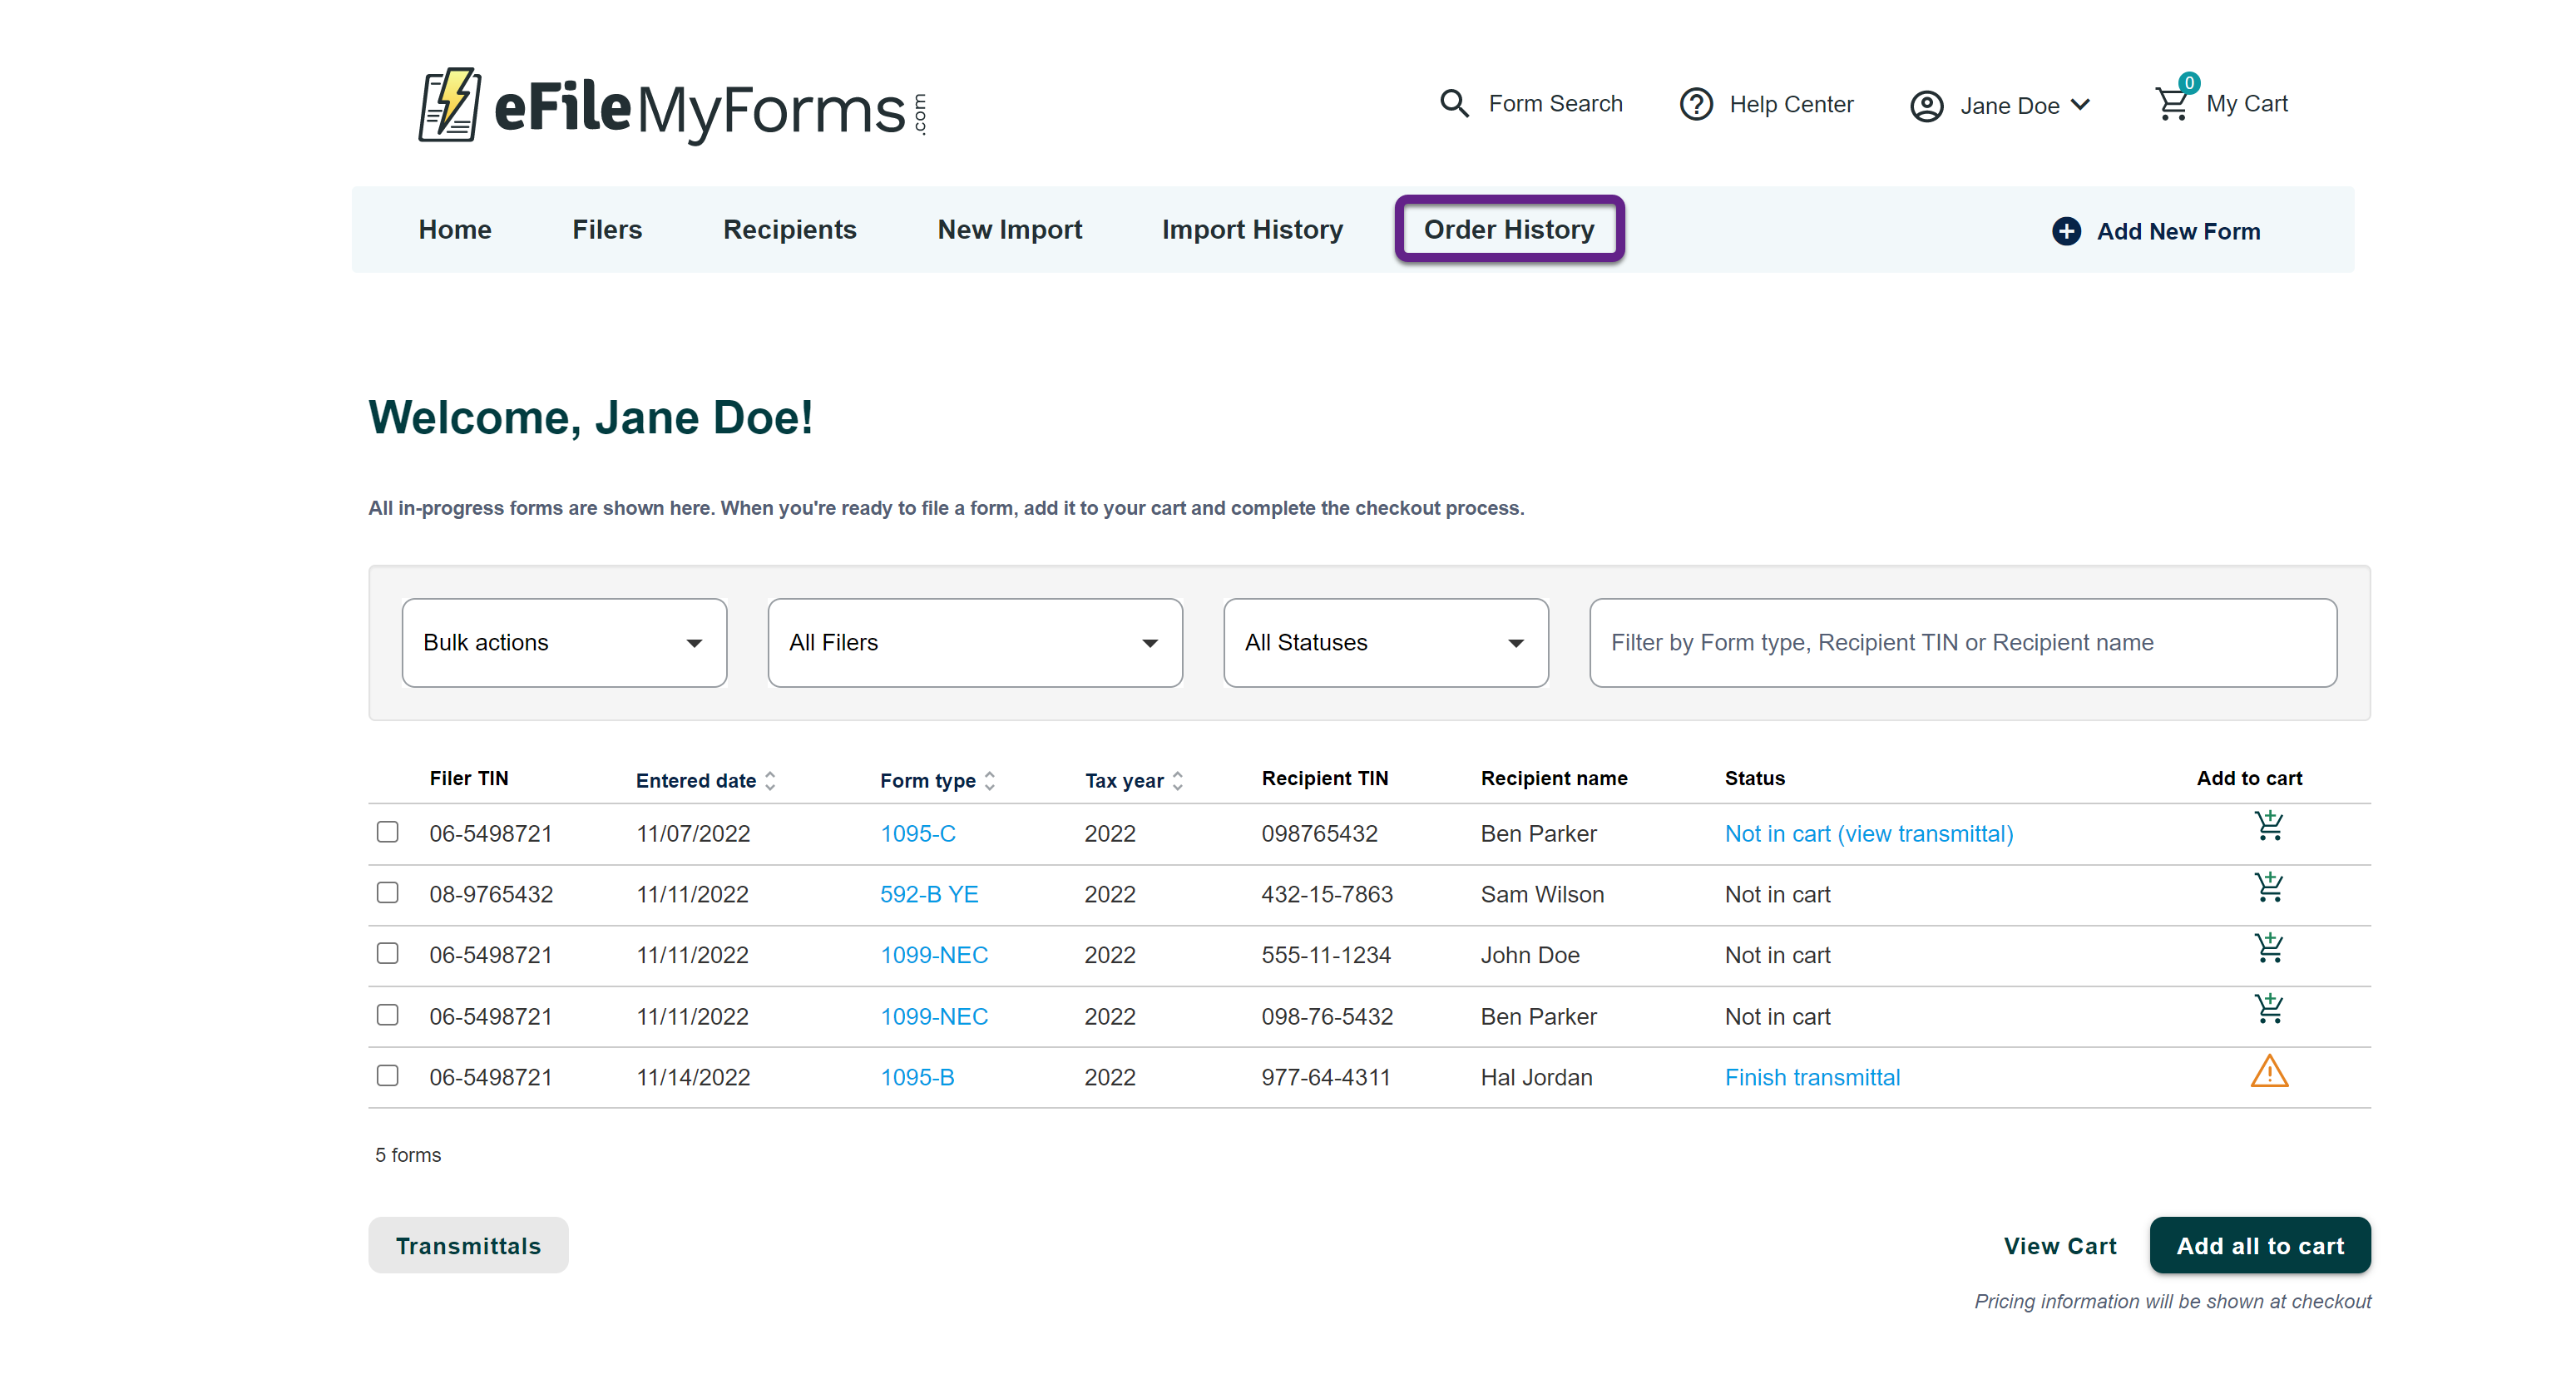 Image of the eFileMyForms Home page with a callout on the Order History page.